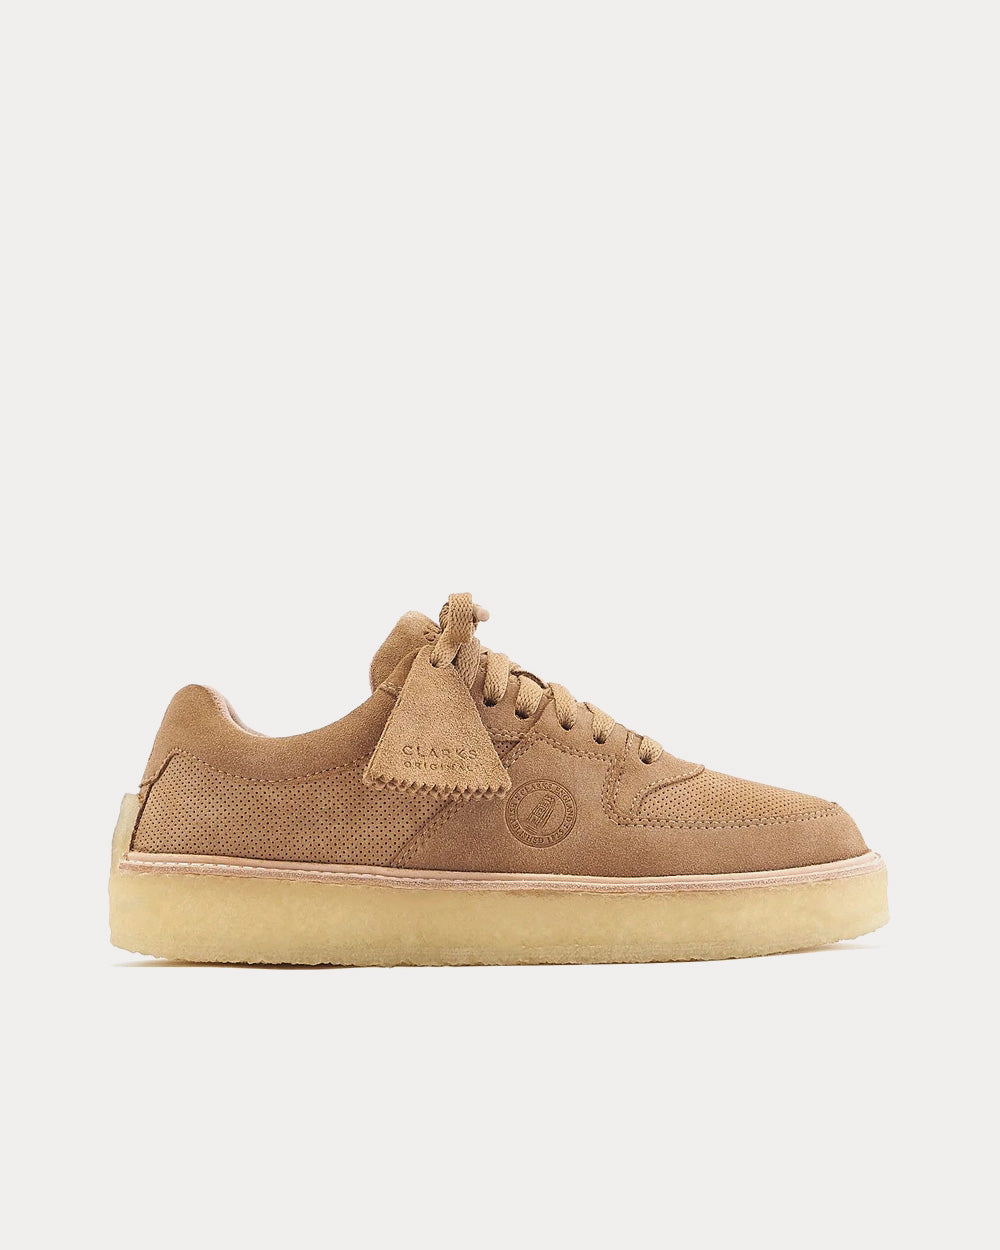 Clarks x Kith - Sandford Suede Tan Low Top Sneakers